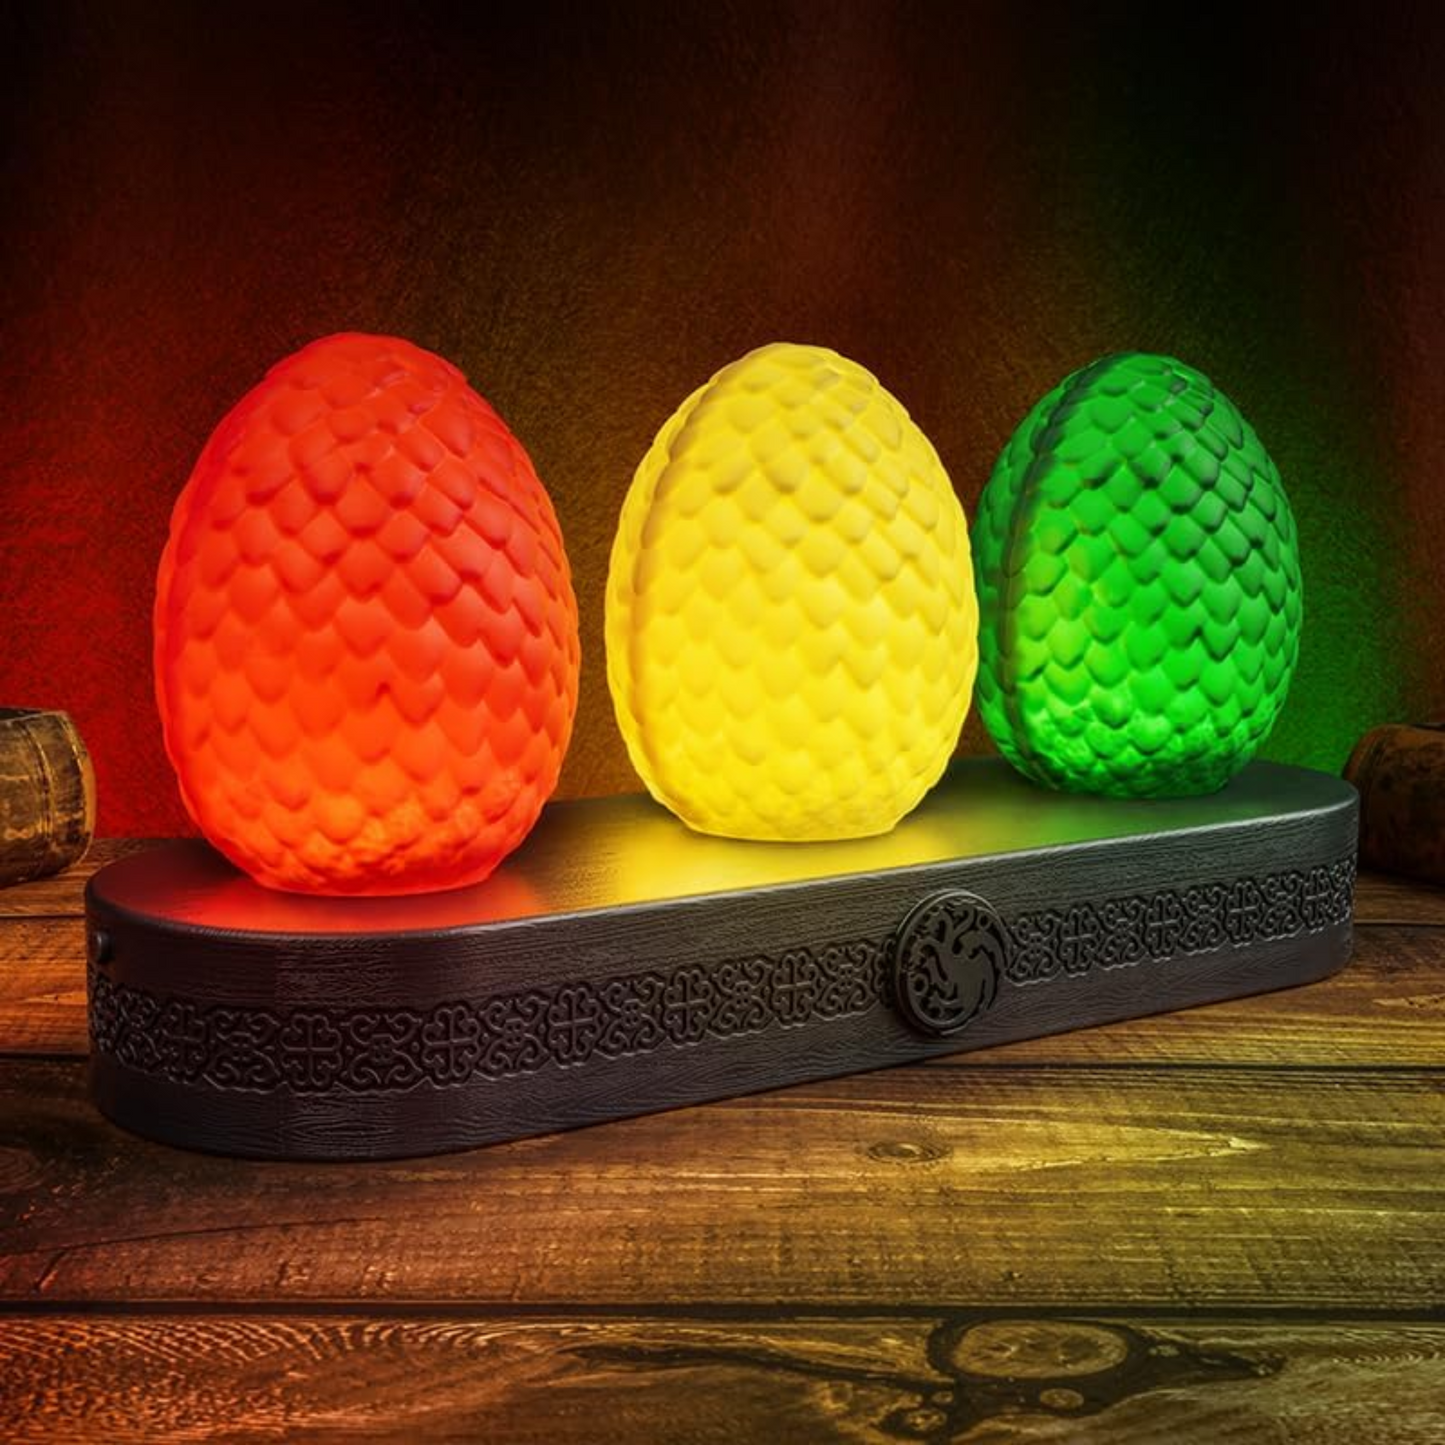 Game of thrones house of the dragon egg light - Paladone